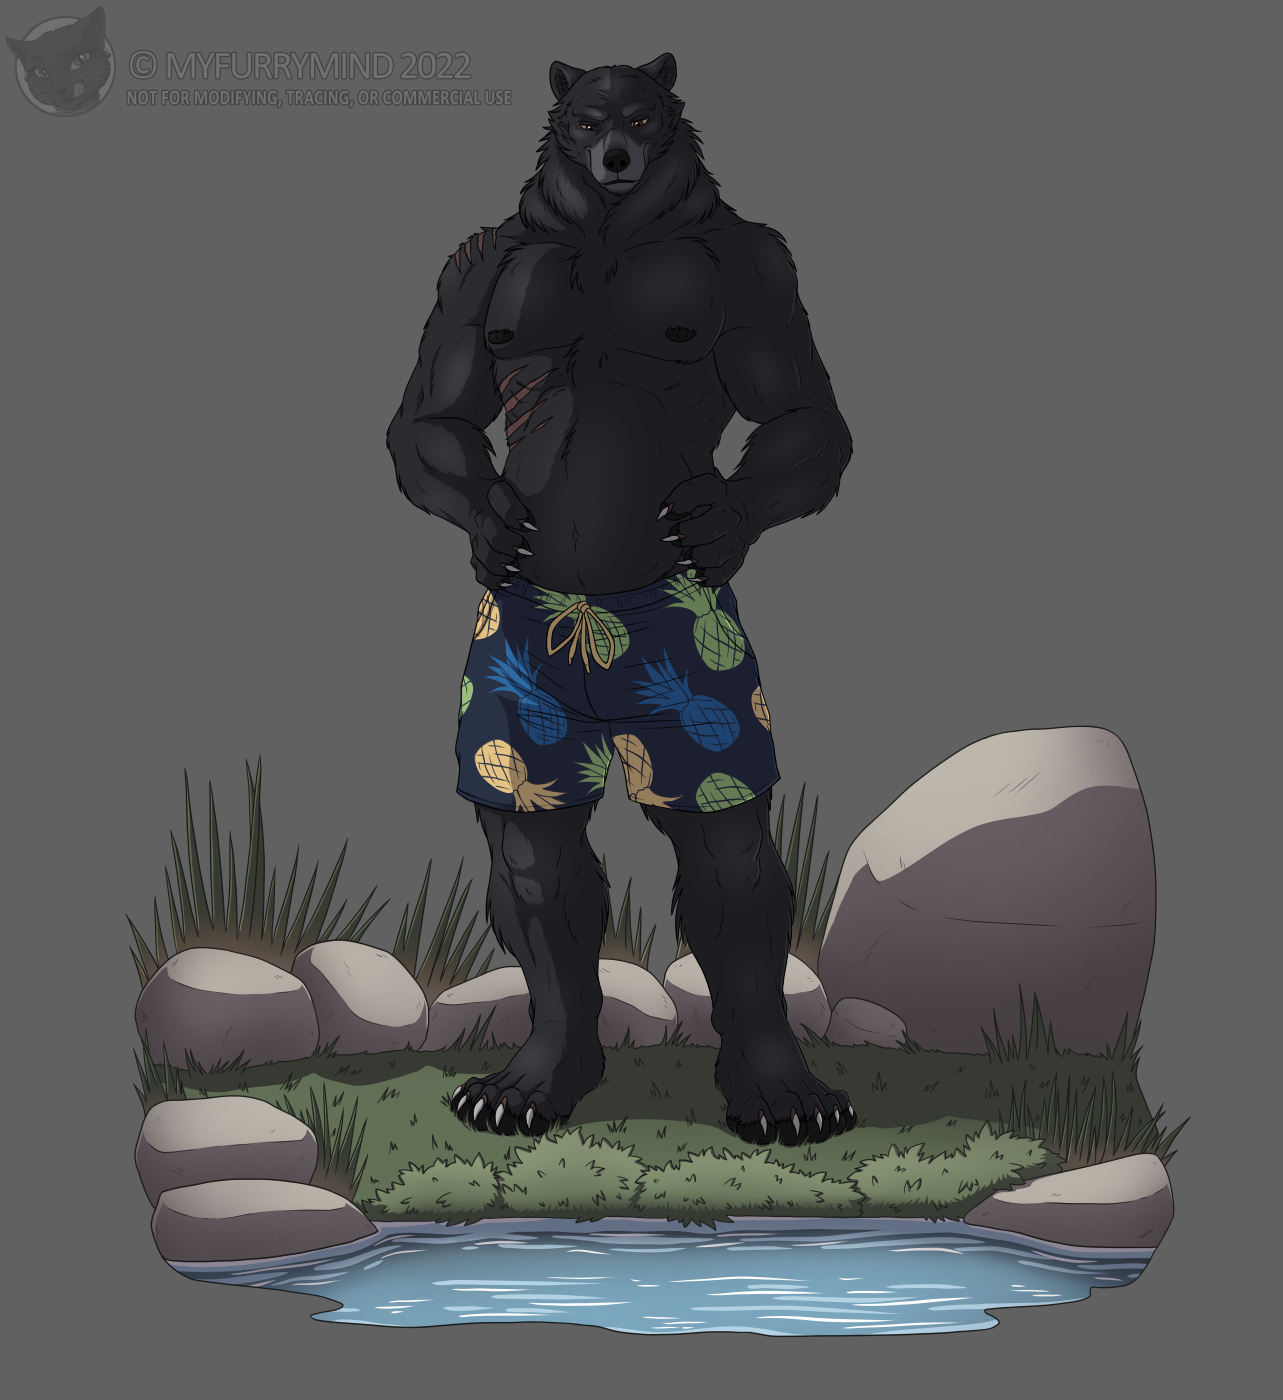  Comm: Going For A Swim for PlagueDoctor96